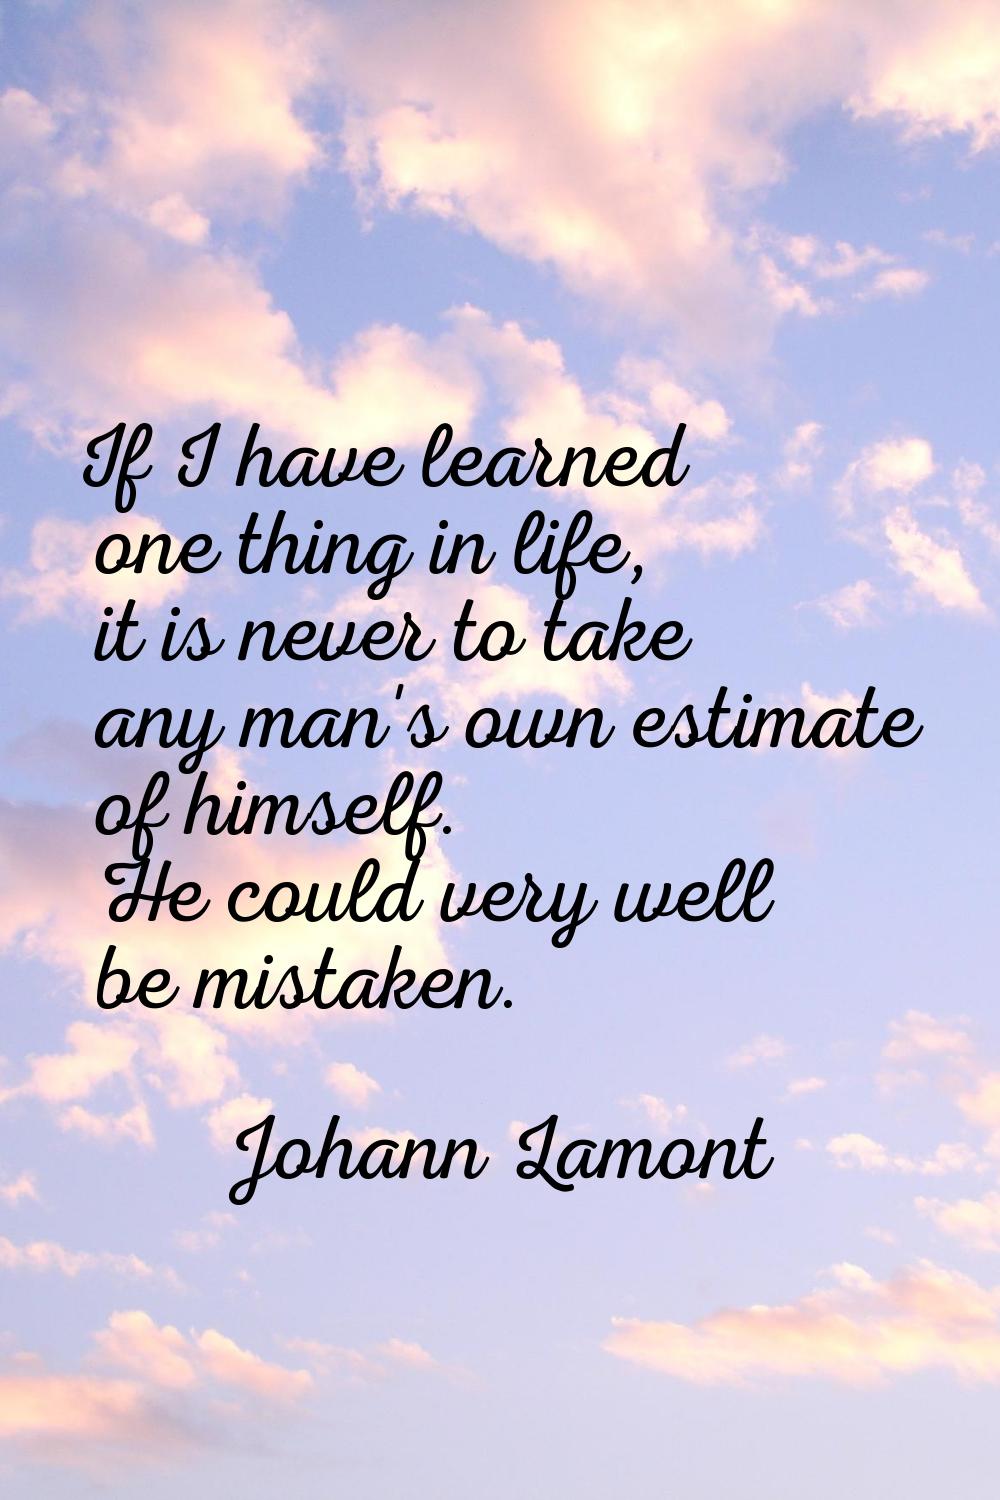 If I have learned one thing in life, it is never to take any man's own estimate of himself. He coul